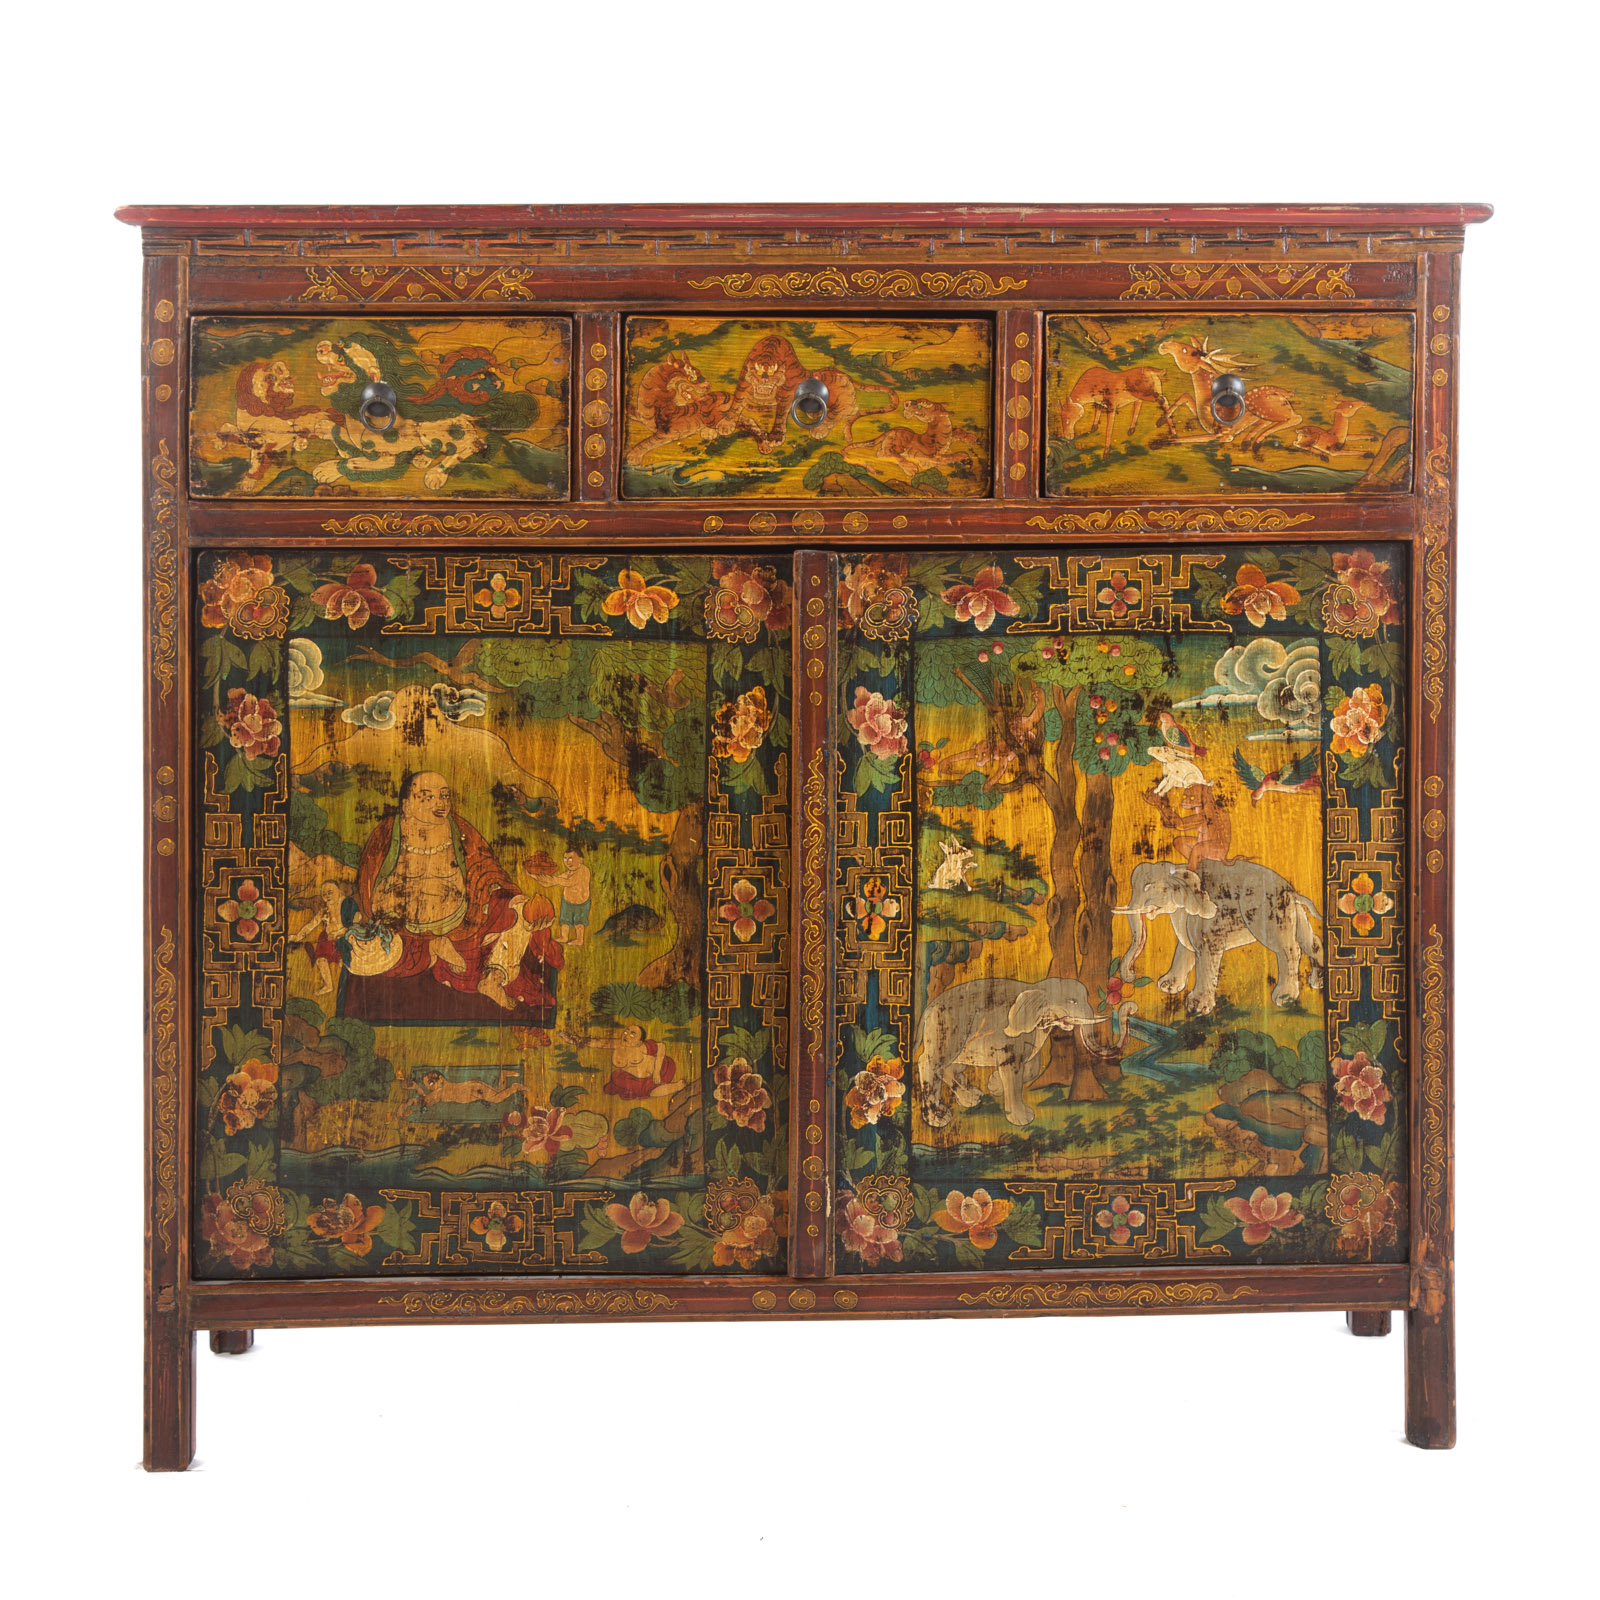 CHINESE STYLE PAINTED CABINET 20th